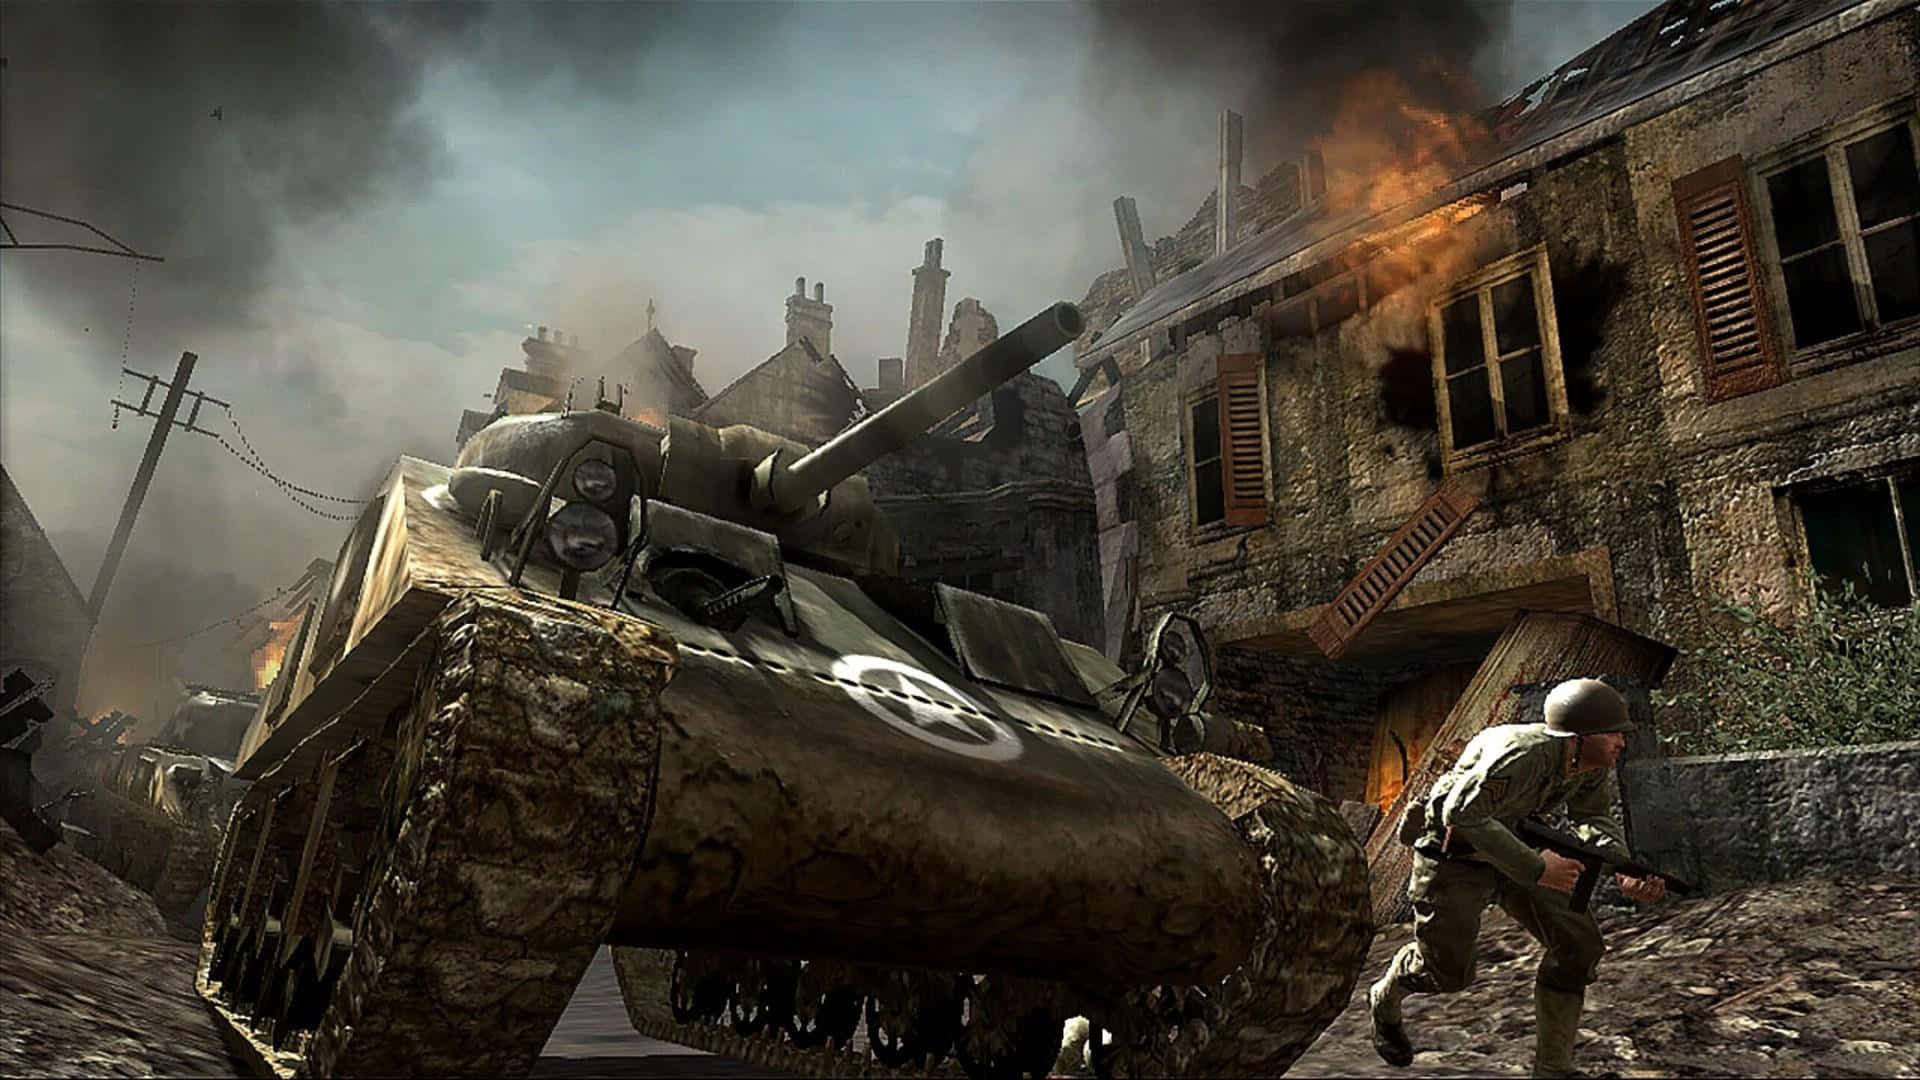 Call of Duty Military Vehicles in Action Wallpaper